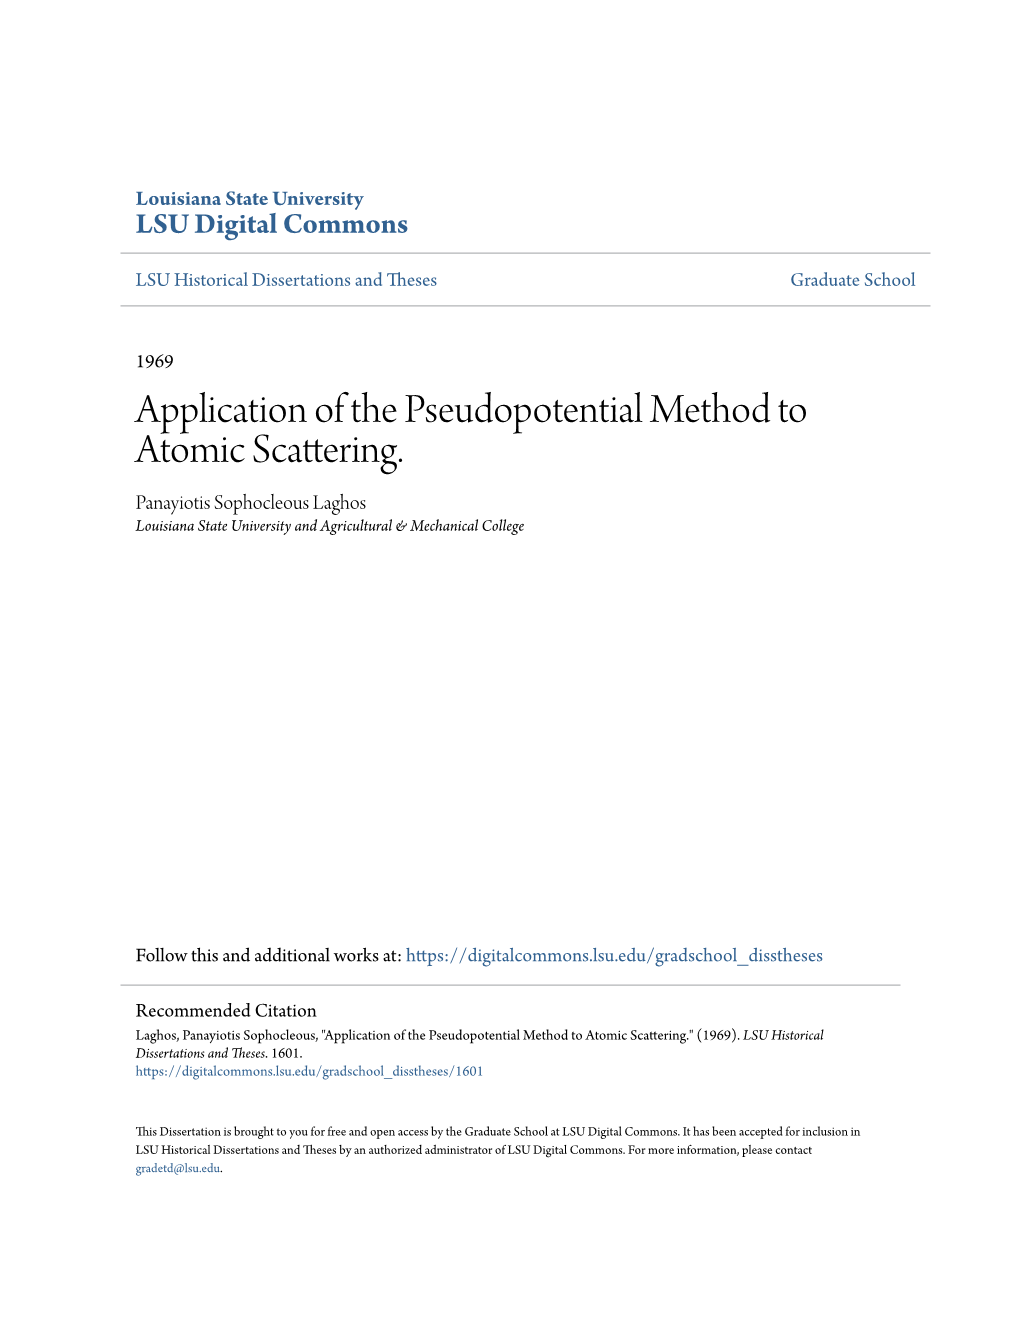 Application of the Pseudopotential Method to Atomic Scattering. Panayiotis Sophocleous Laghos Louisiana State University and Agricultural & Mechanical College